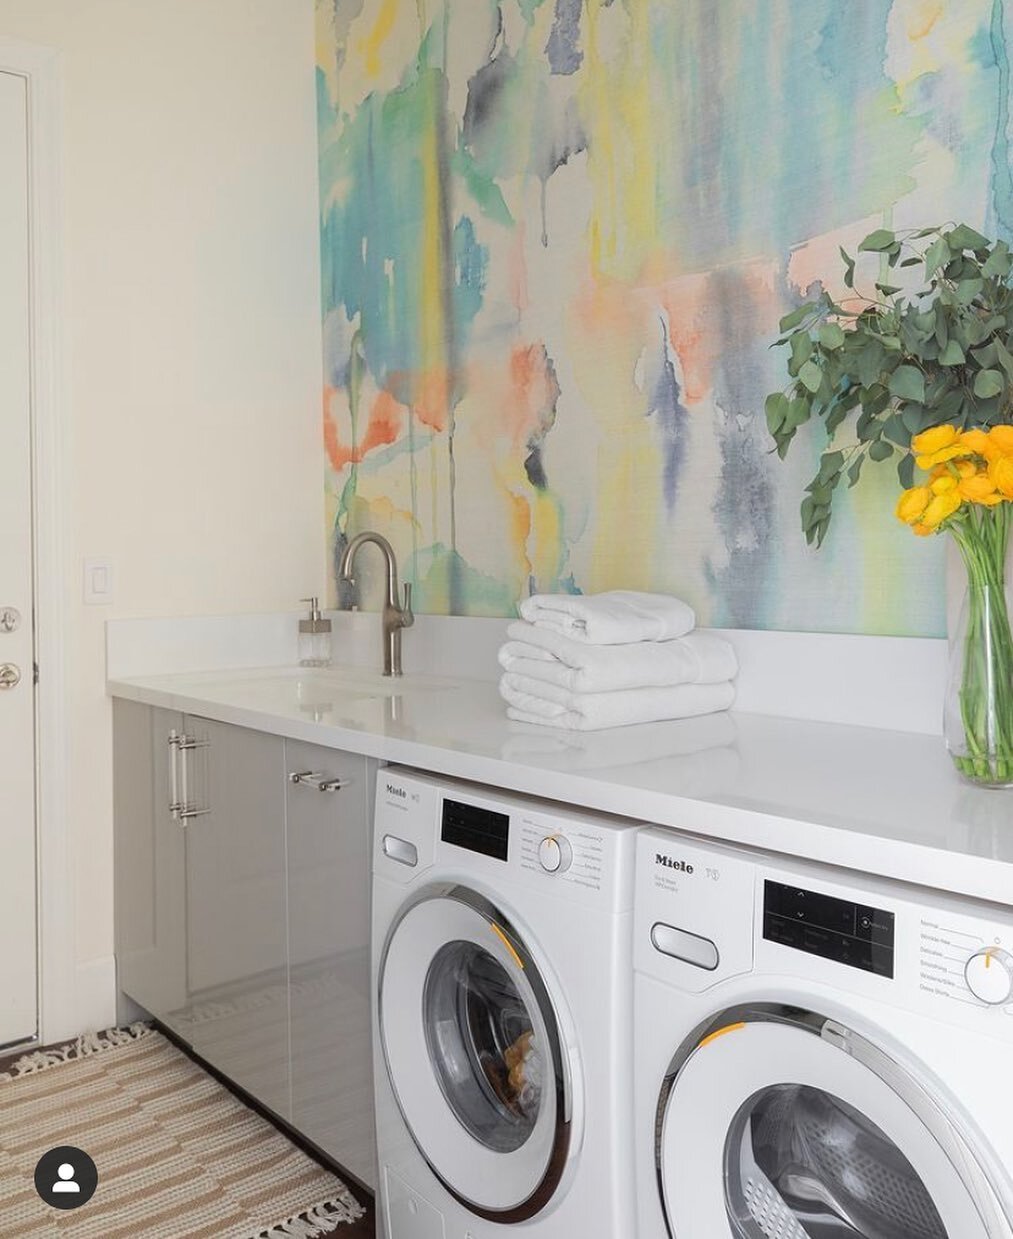 Still obsessed with the color and beauty in this laundry room by @designforlivingbyah 
Repost: @designforlivingbyah 
Wallcovering: @phillipjeffriesltd